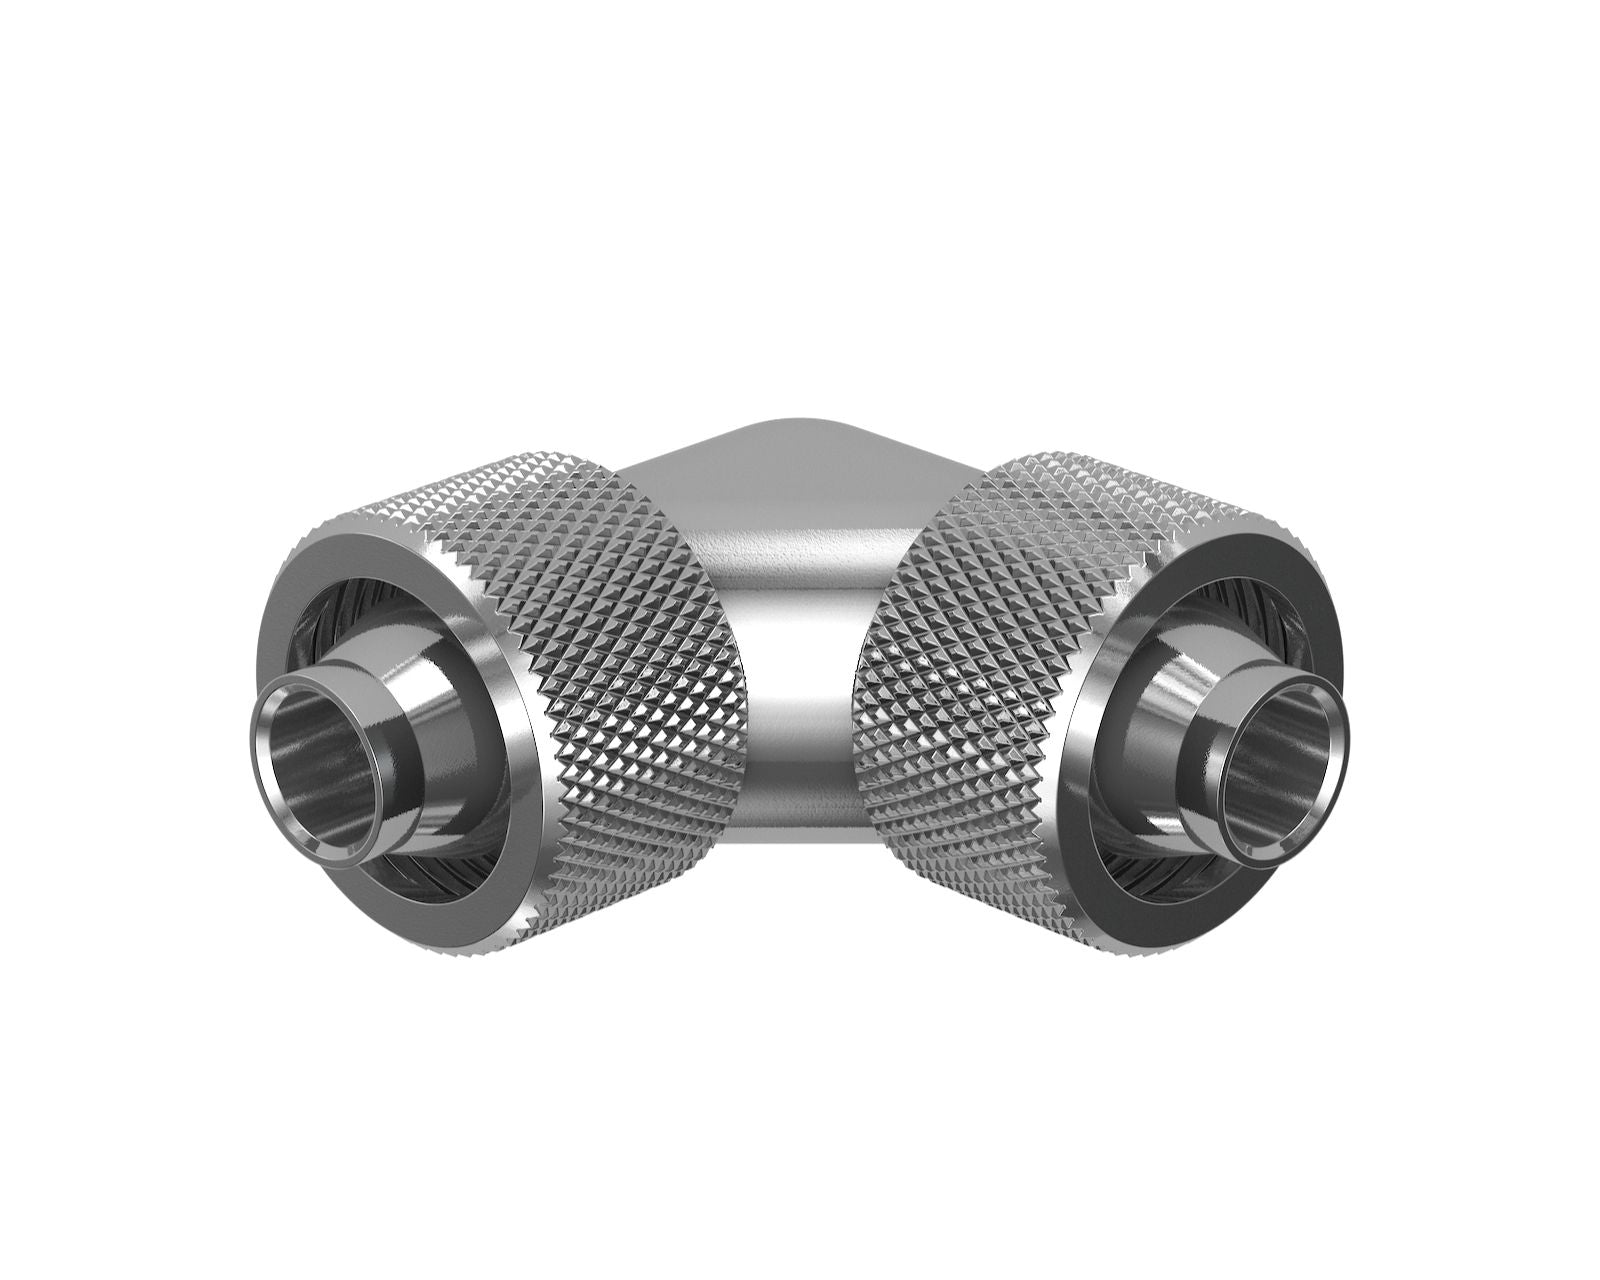 PrimoChill SecureFit SX - Premium 90 Degree Compression Fitting Set For 7/16in ID x 5/8in OD Flexible Tubing (F-SFSX75890) - Available in 20+ Colors, Custom Watercooling Loop Ready - Silver Nickel